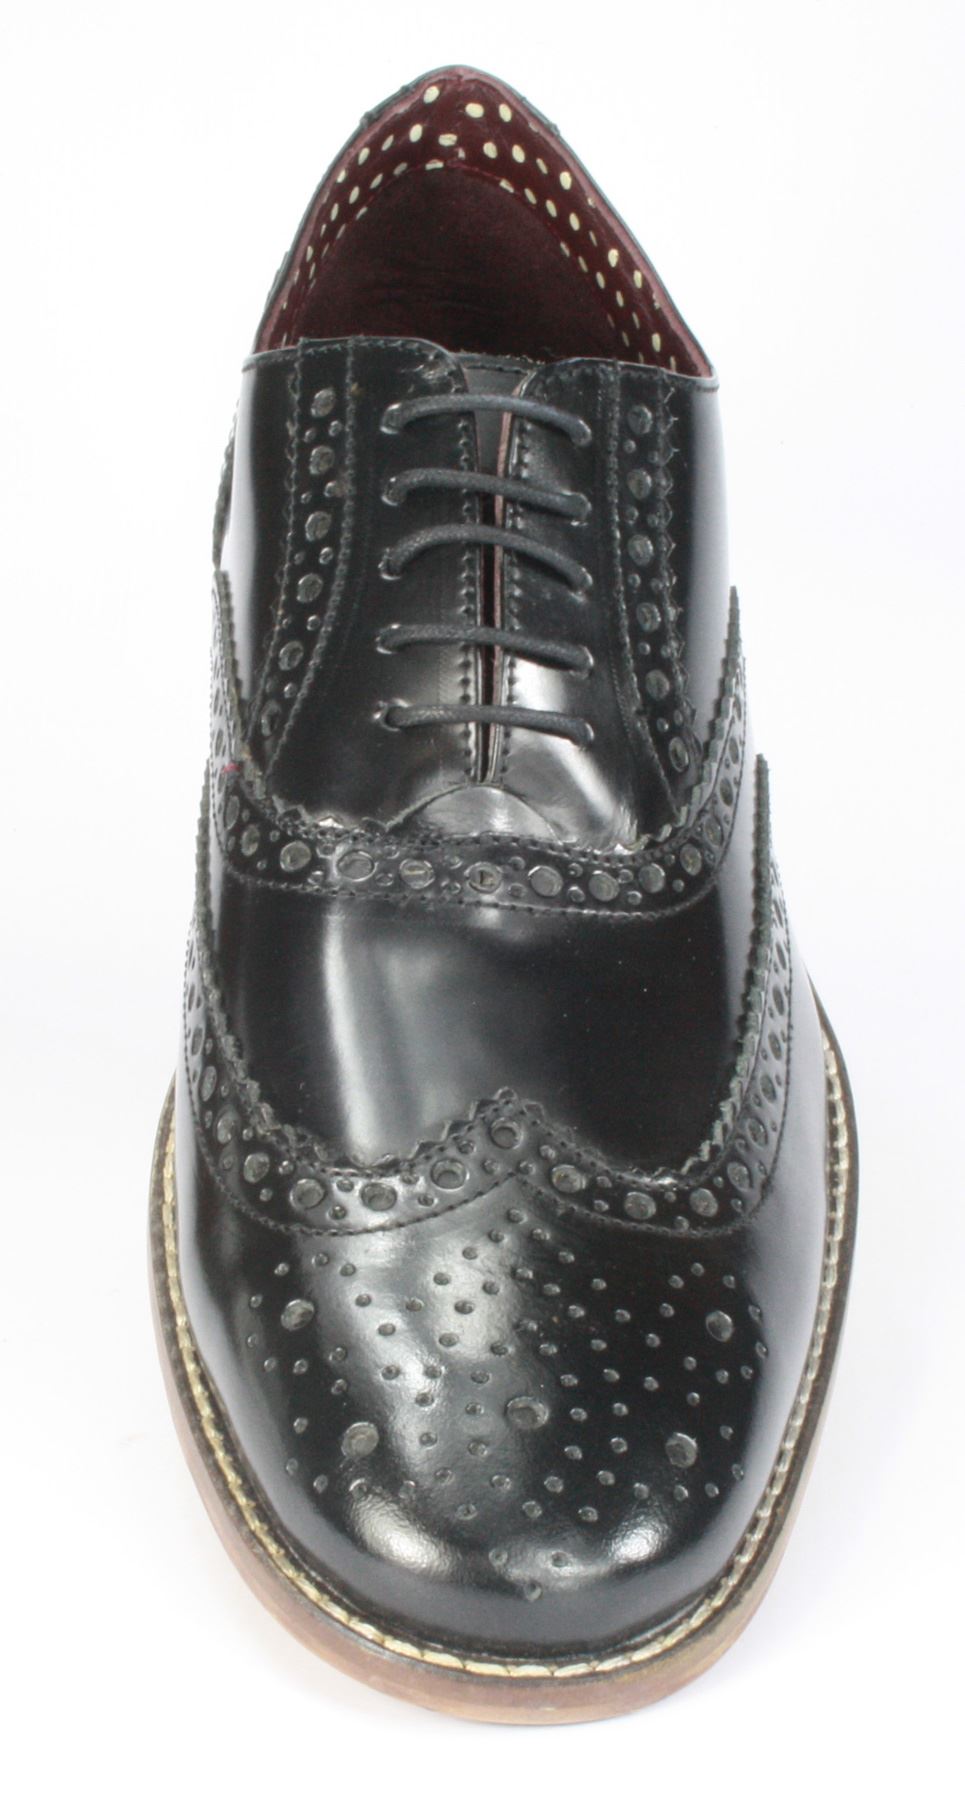 London Brogues Mens Leather Lace Up Wingtip Formal Gatsby Evening Brogue Shoes